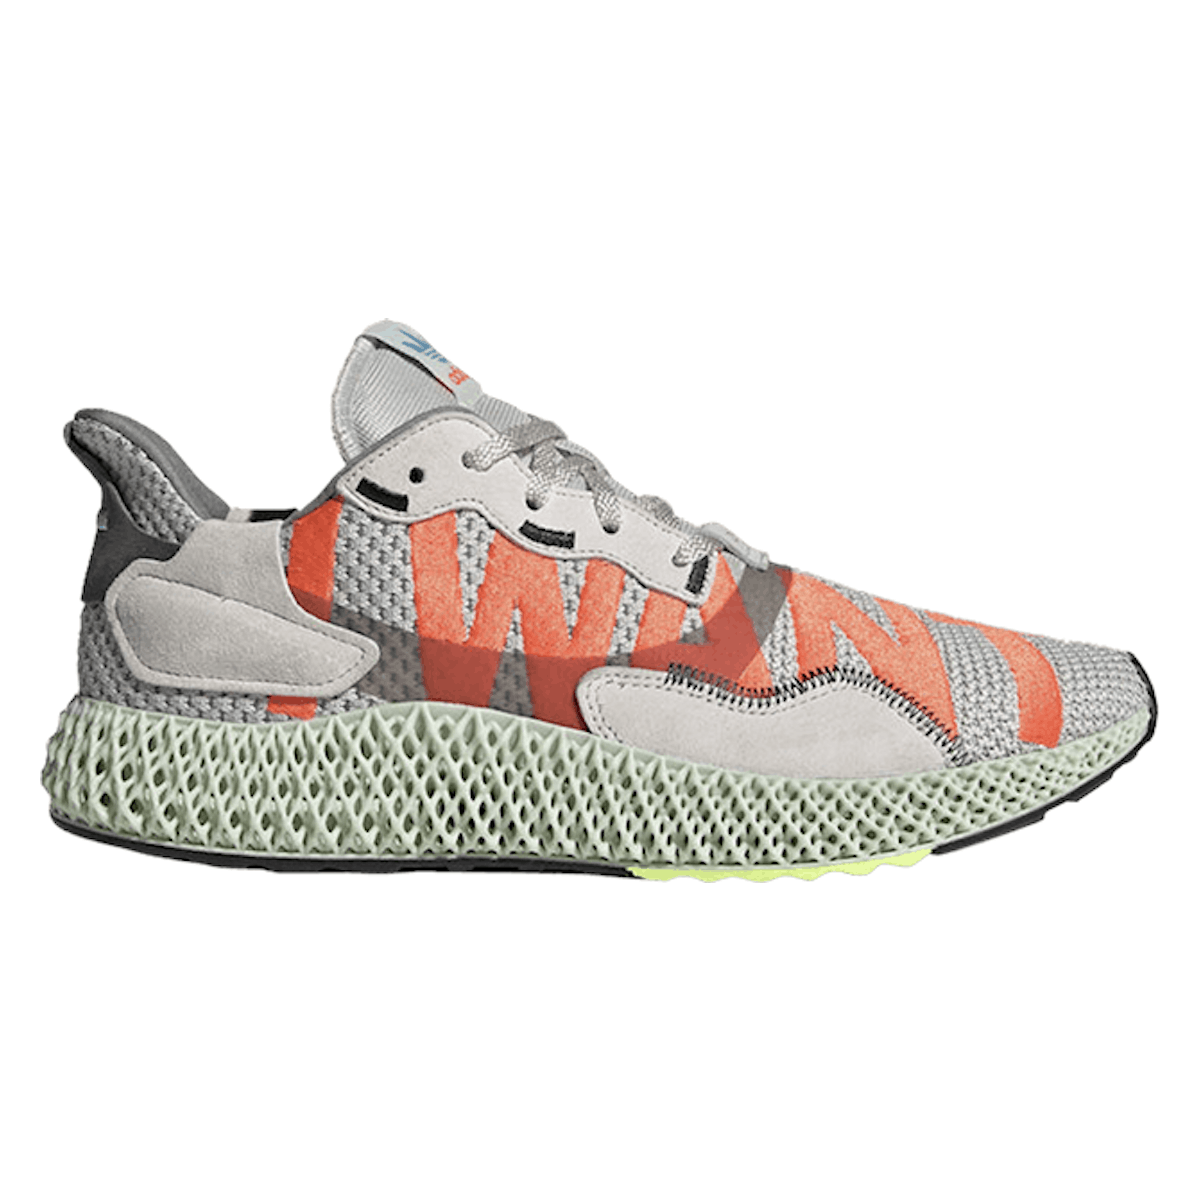 Adidas ZX 4000 4D "I Want, I Can"